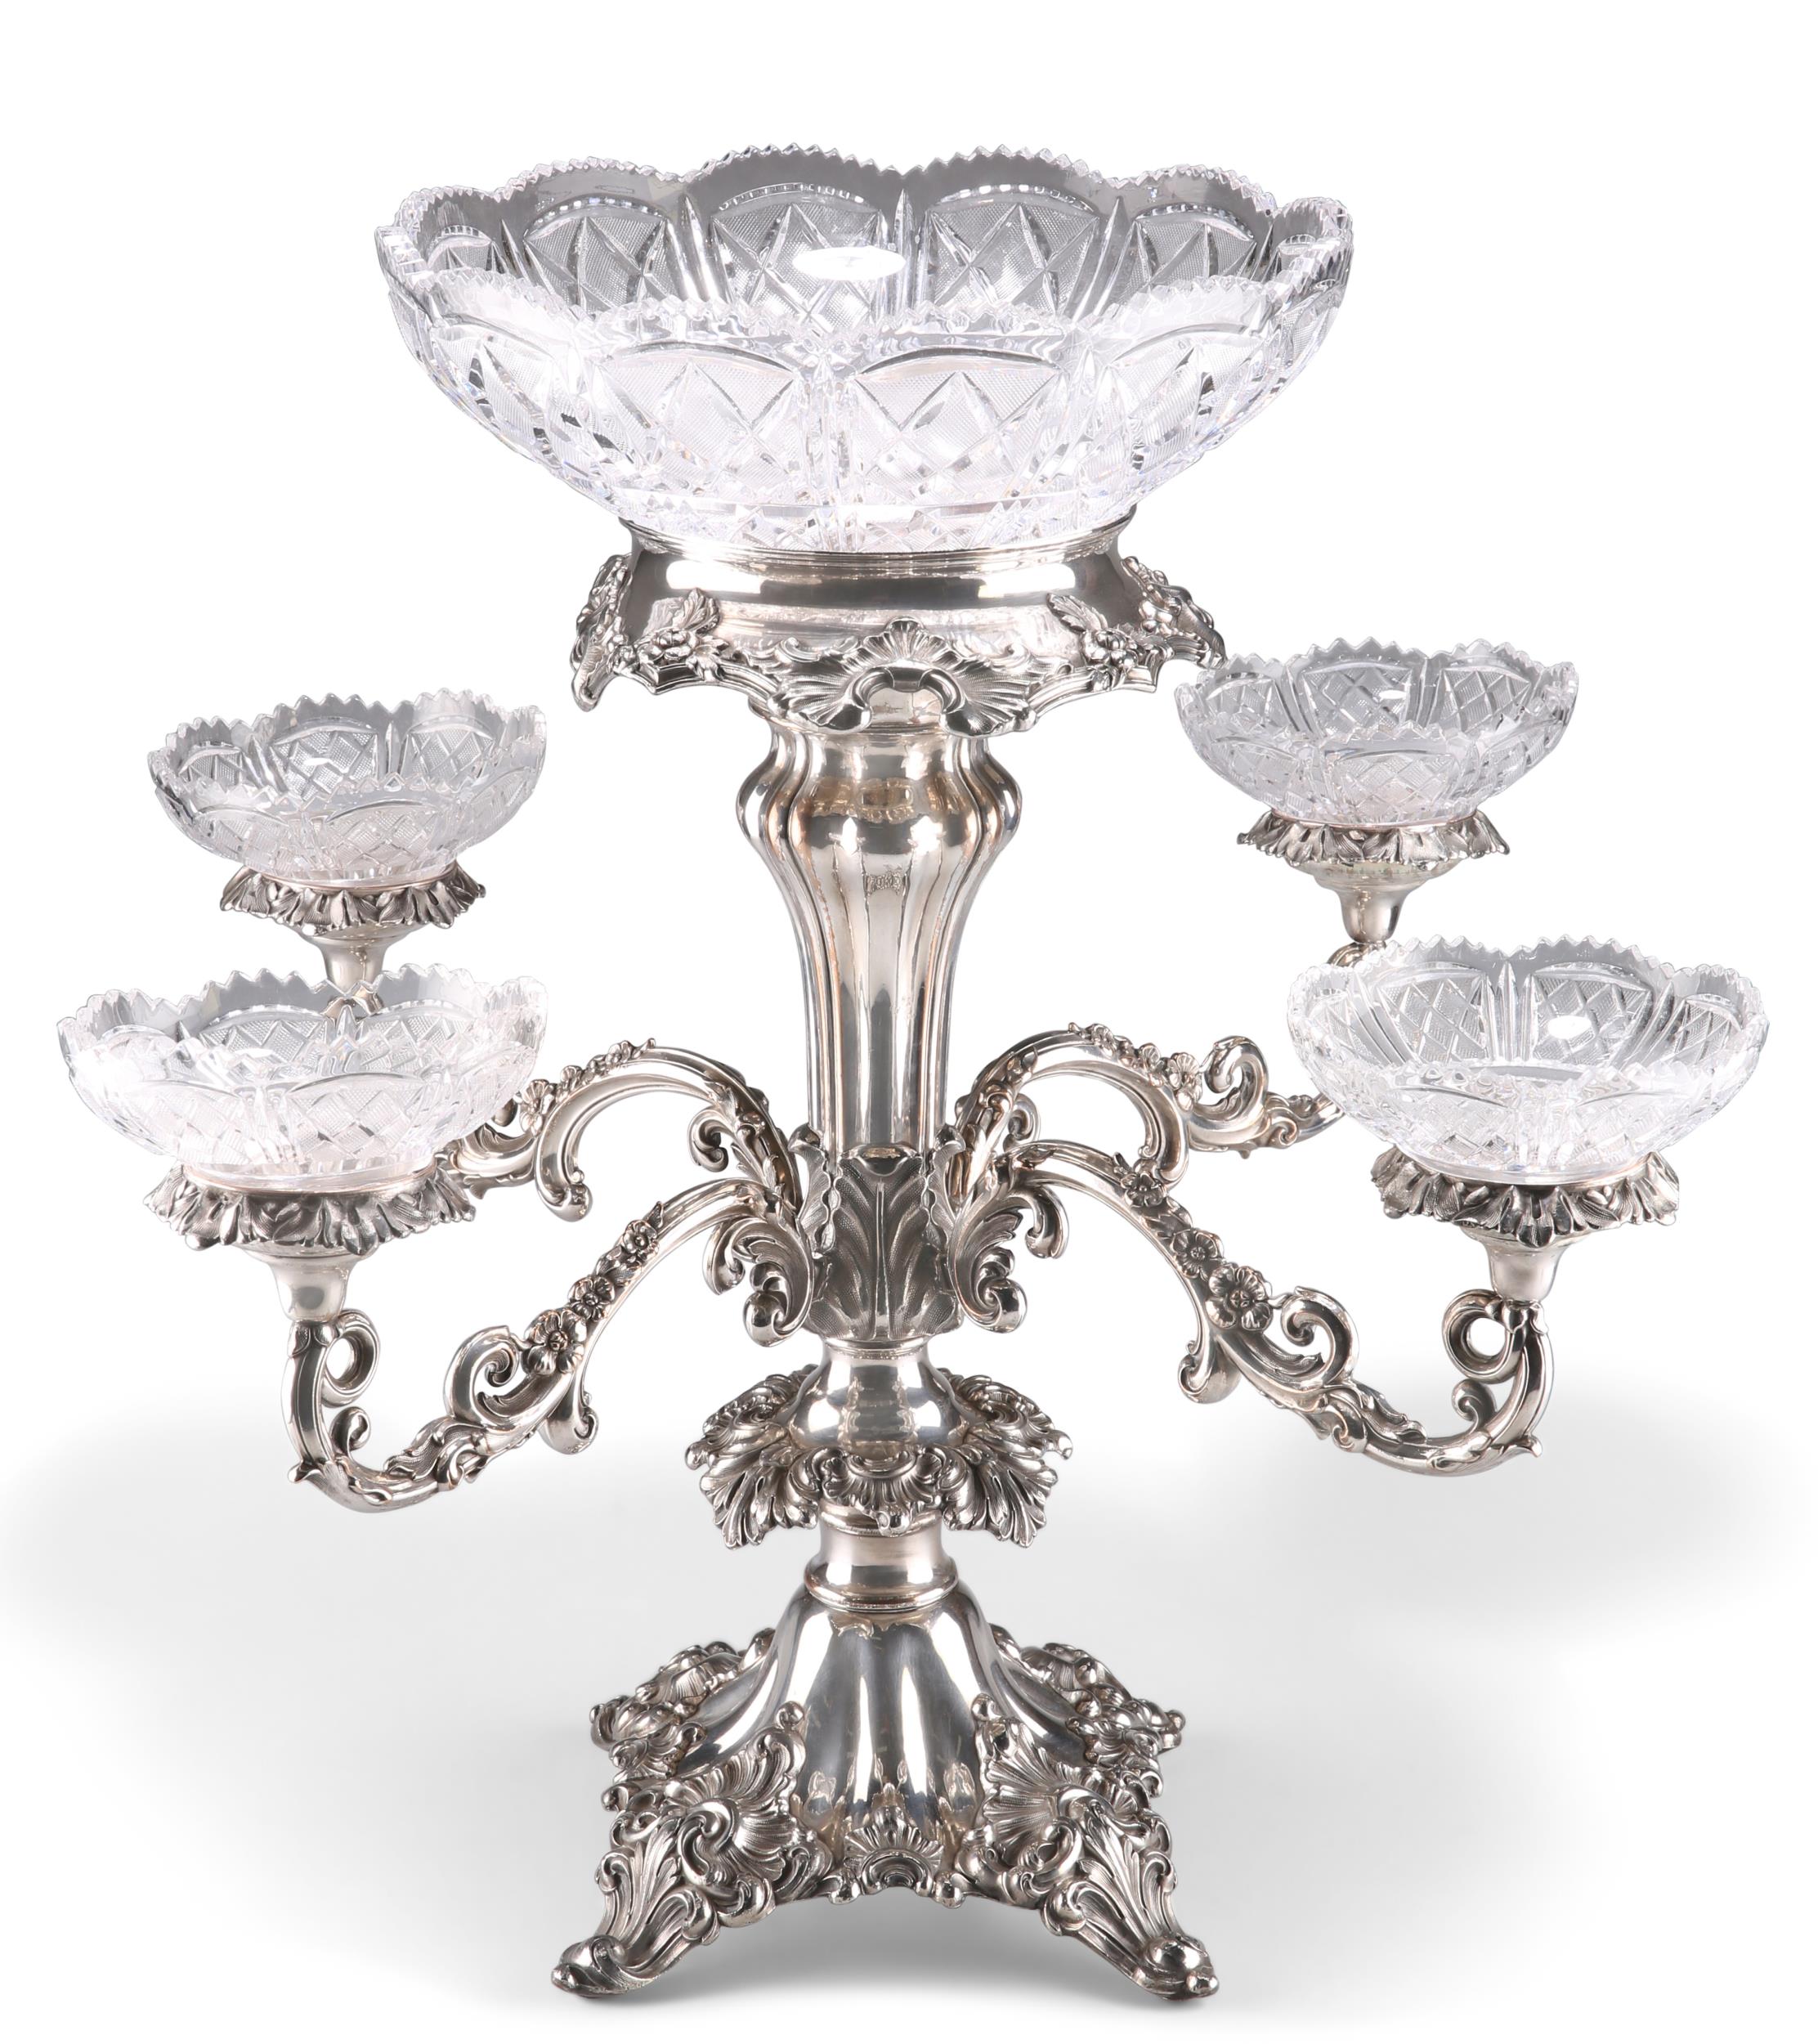 A FINE 19TH CENTURY SILVER-PLATED CENTREPIECE